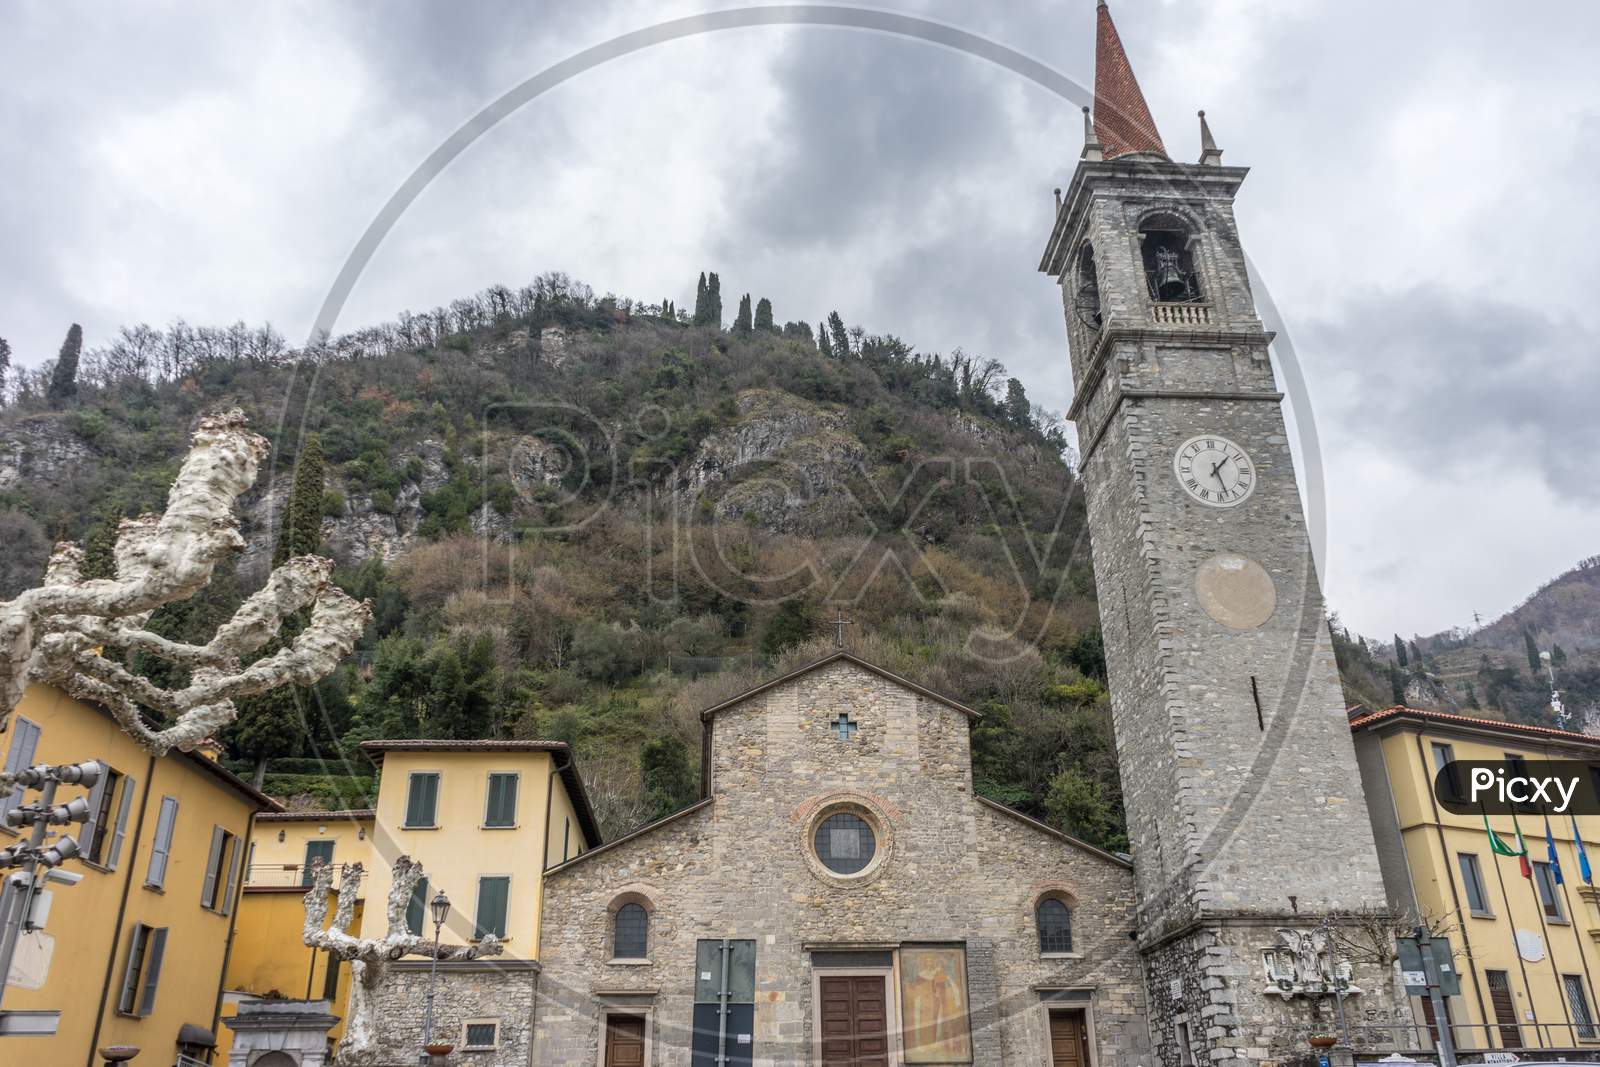 Varenna, Italy - March 31, 2018: The Church Of Saint George In Varenna, Italy